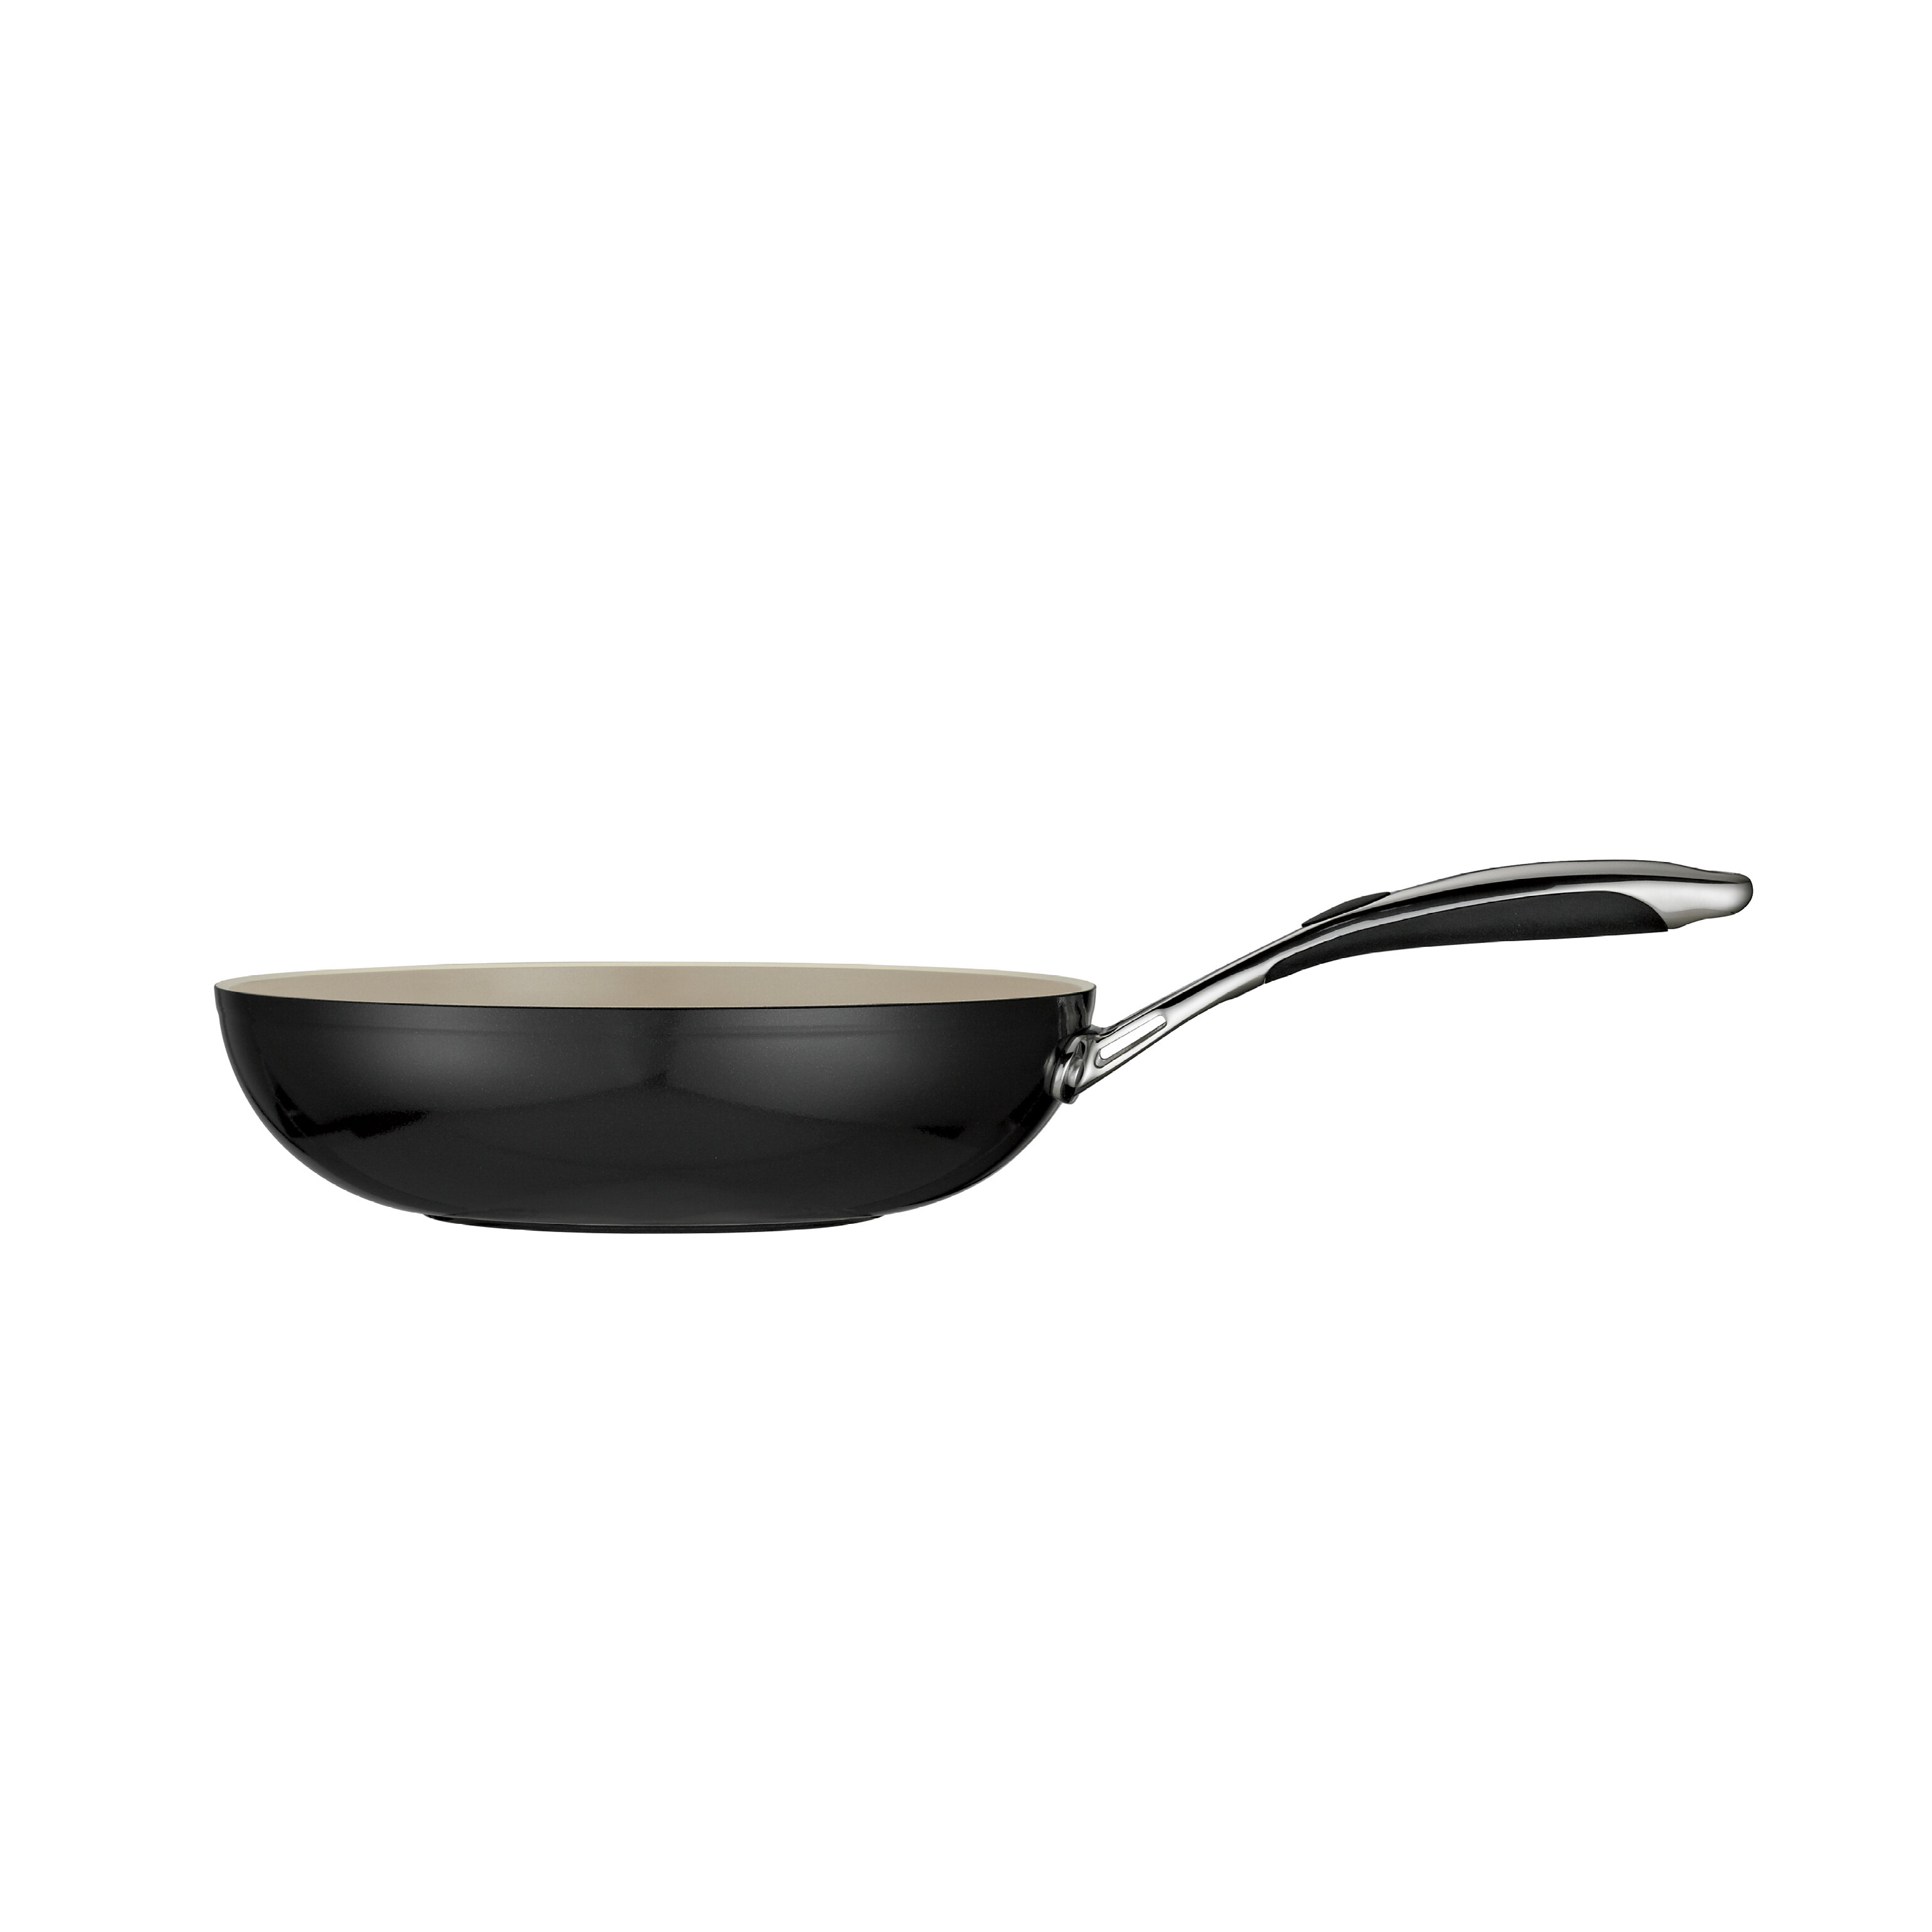 Tramontina Gourmet Ceramica Deluxe 11 Non Stick Skillet with Lid & Reviews